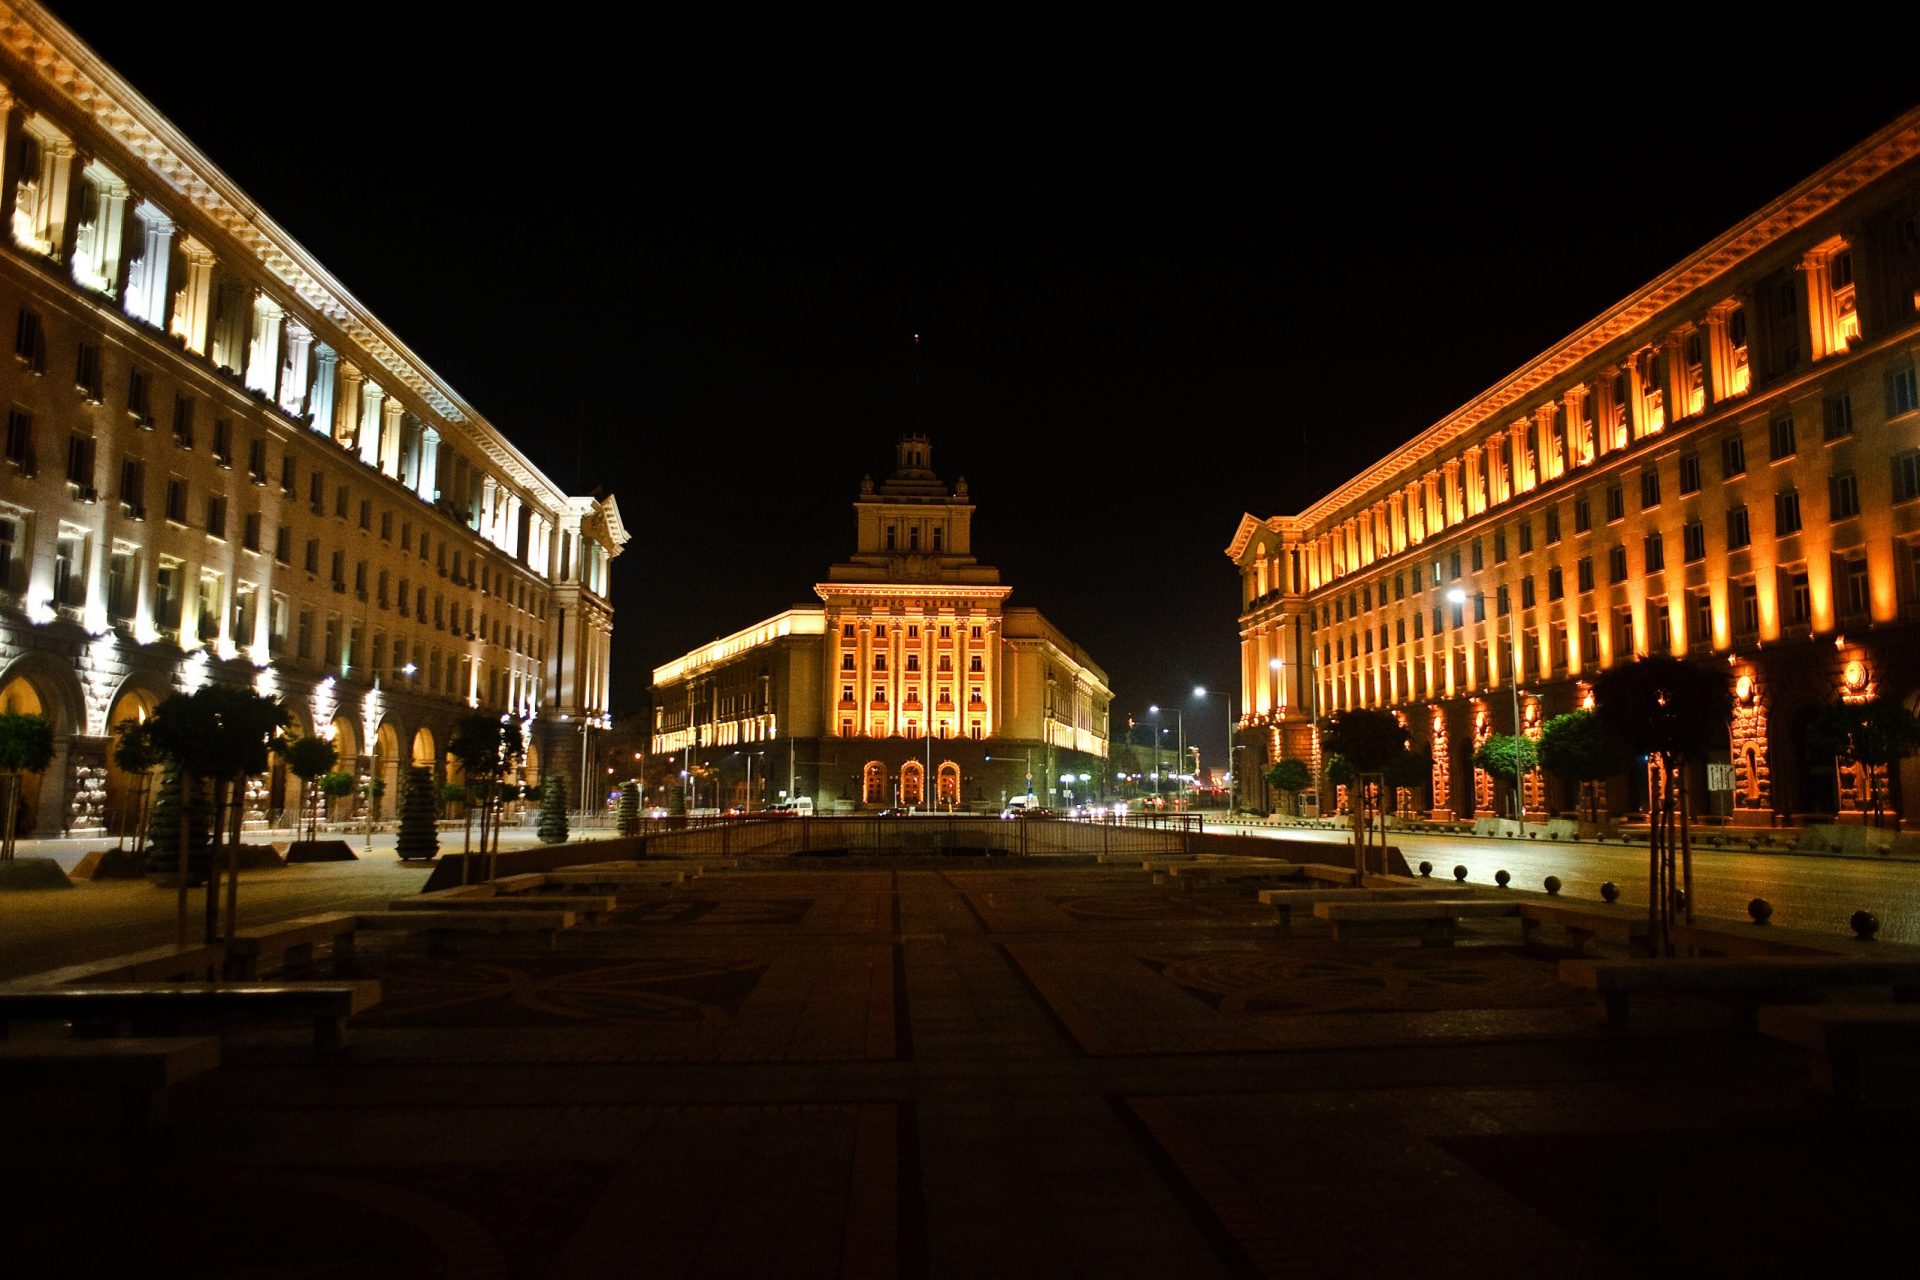 <p>Sofia is also appreciated by young people for its nightlife. There is no shortage of trendy restaurants and lively bars there! Vitosha Boulevard, Sofia's main pedestrian street, is one of the city's famous places to go out.</p> <p>The average price of one night in an Airbnb in Sofia (according to Time Out) is €52 ($56).</p>